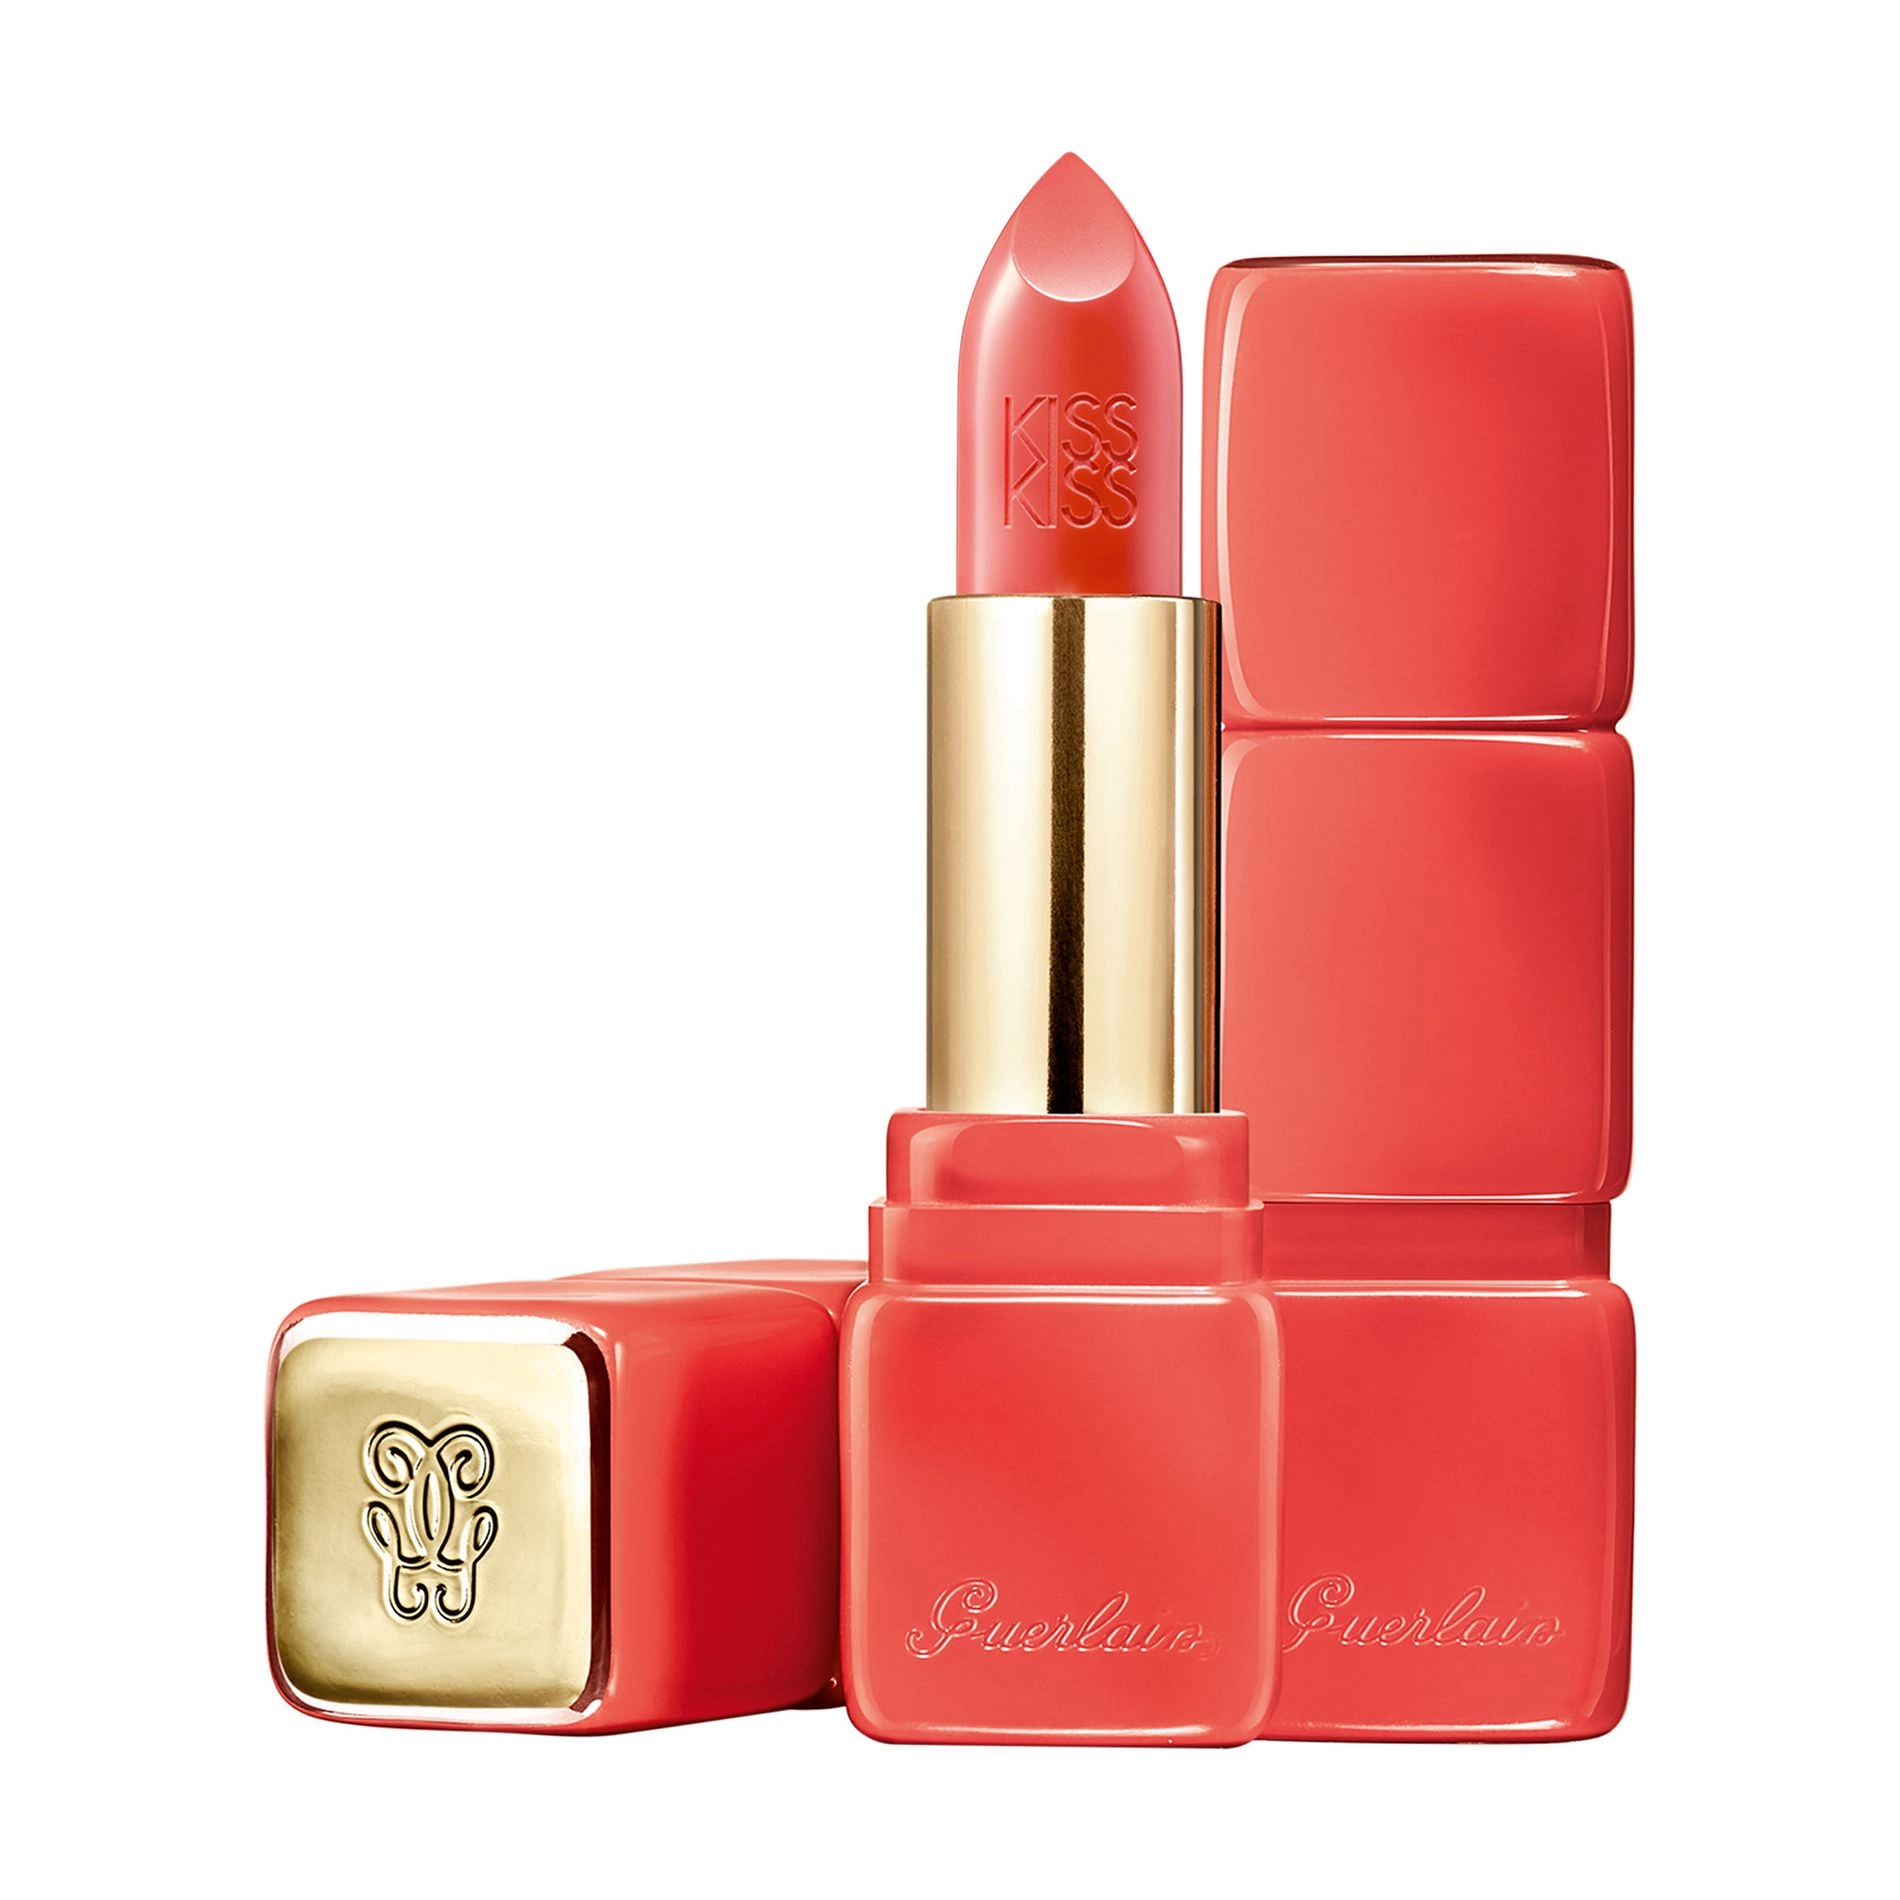 Guerlain Помада для губ KissKiss Le Rouge Creme Galbant 344 Sexy Coral, 3.5 г - фото N1